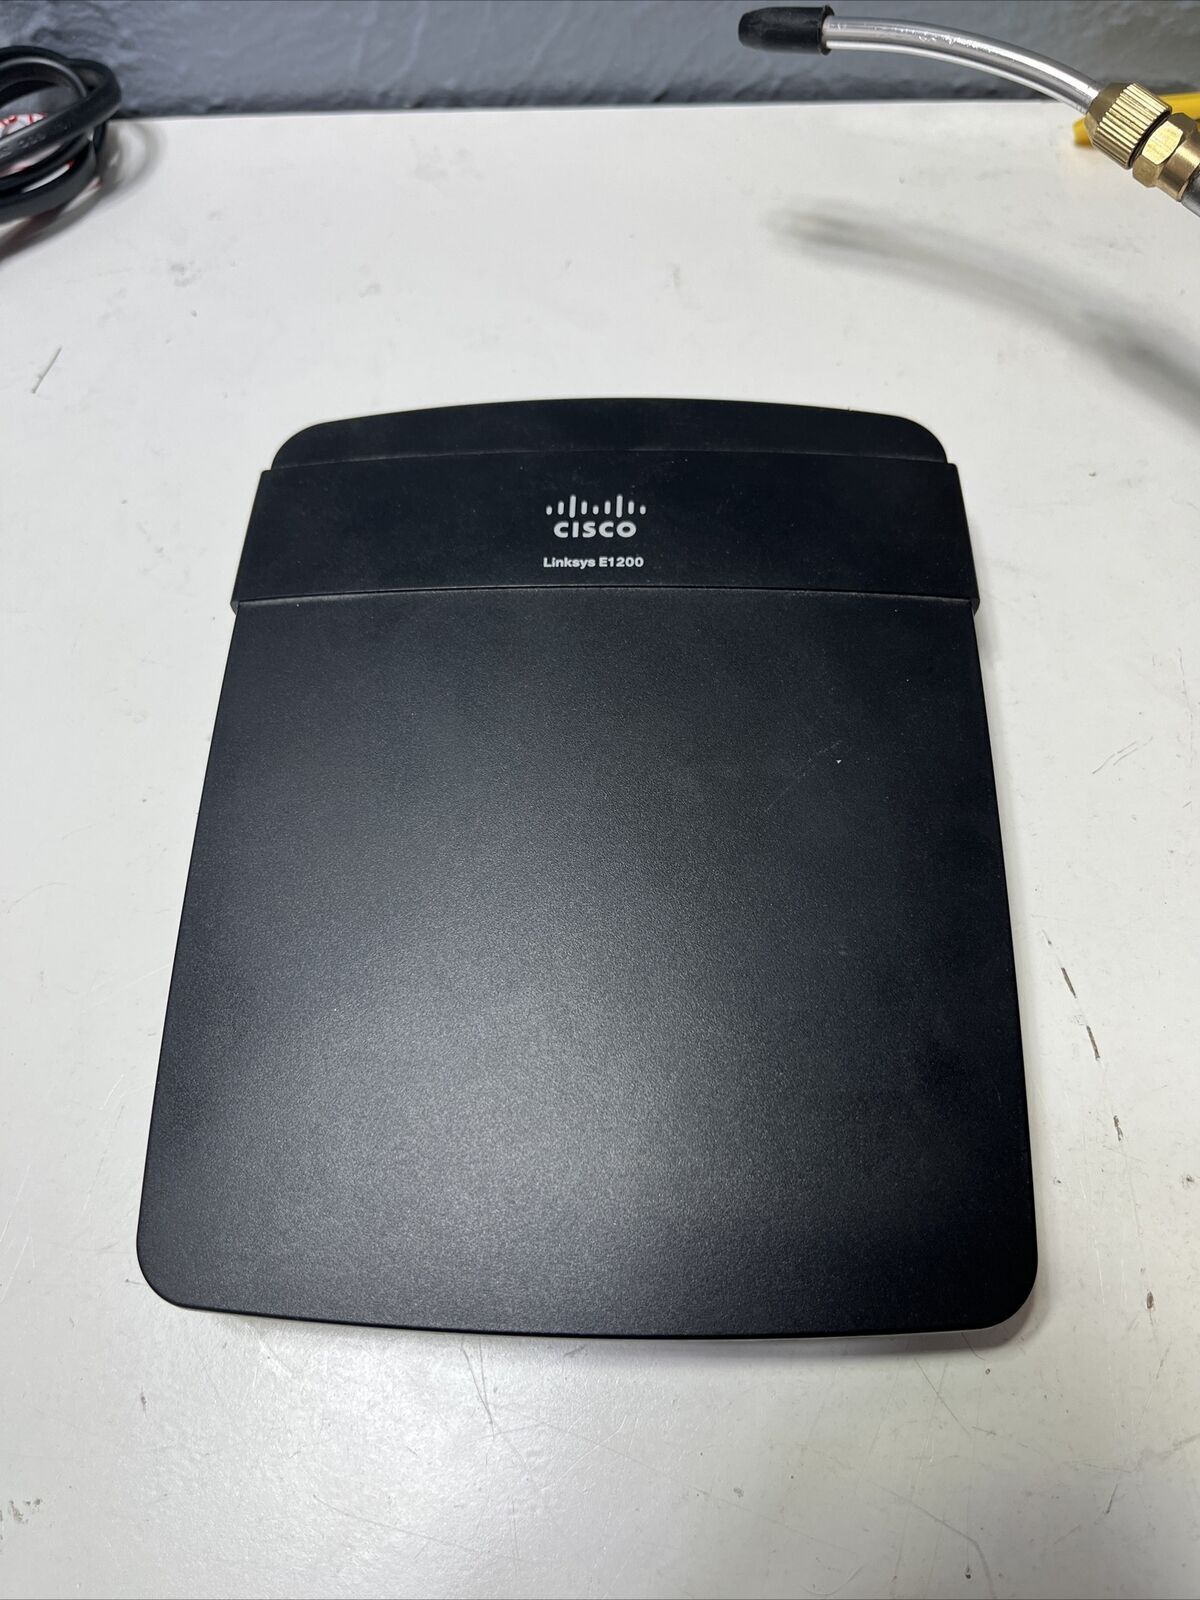 Cisco Linksys E1200 4-Port Gigabit Ethernet Dual-Band Wireless Router - UNTESTED